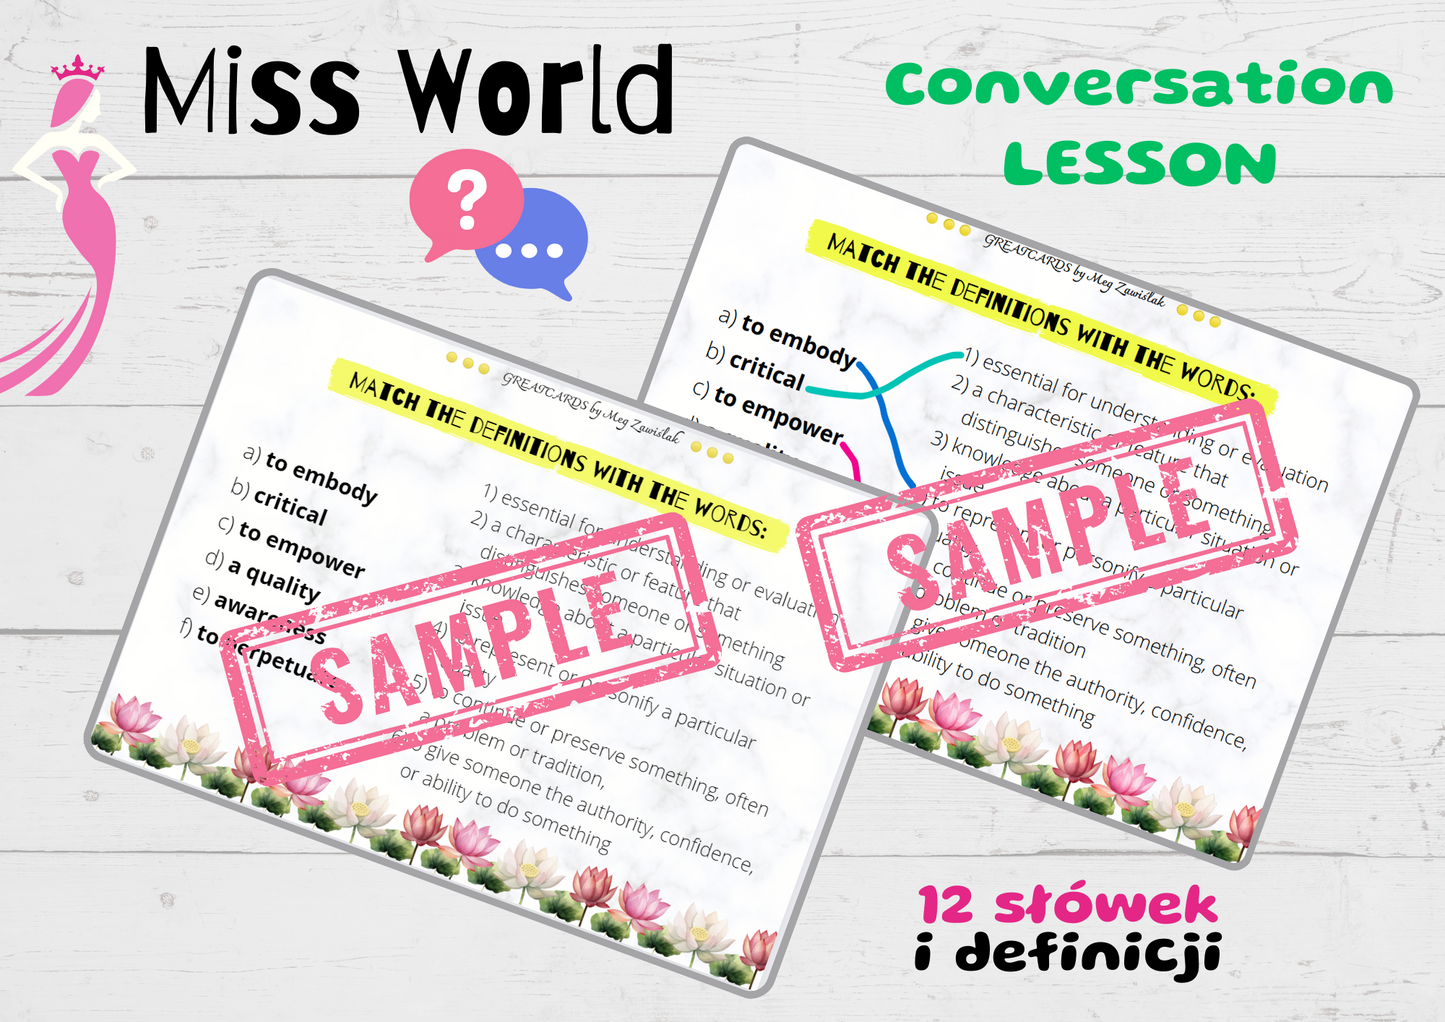 Greatcards - Miss World Conversation Lesson